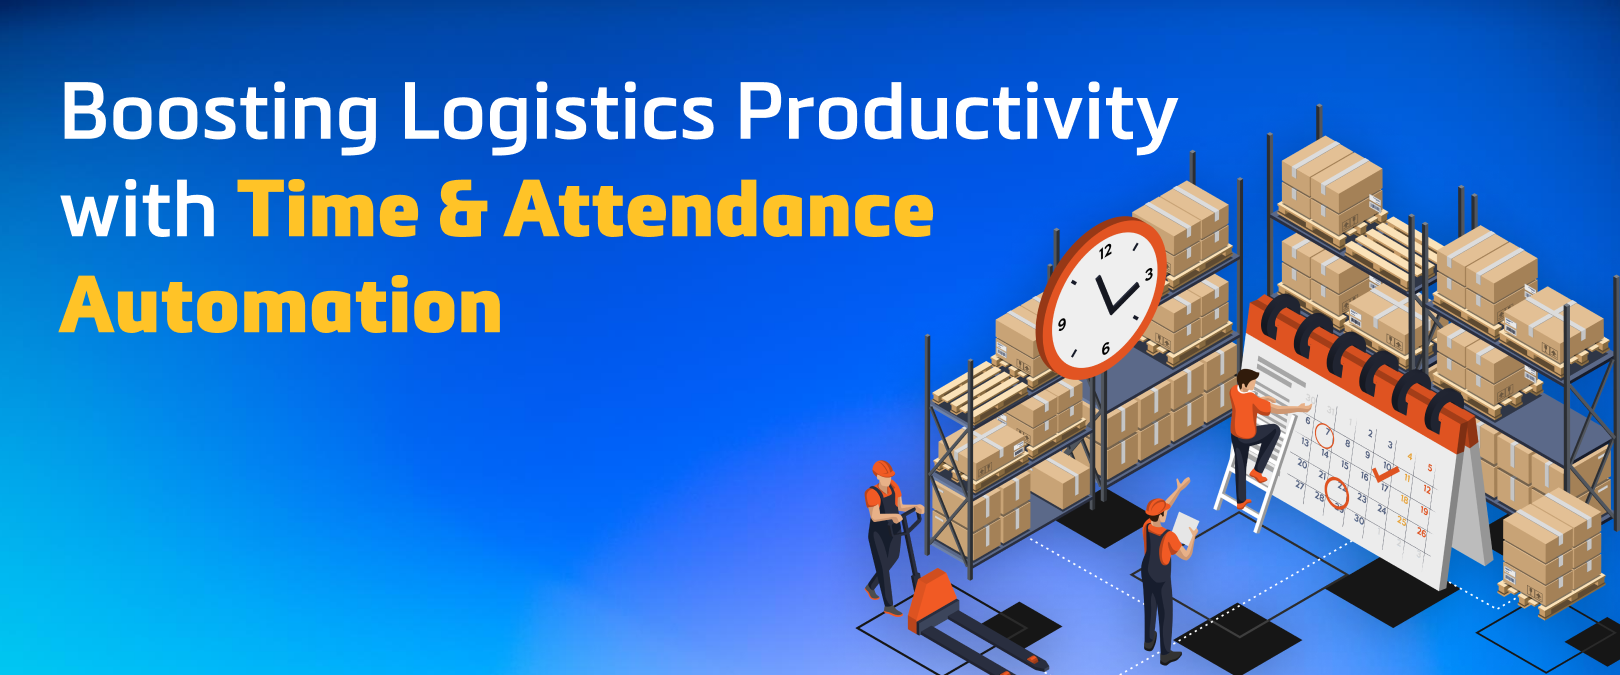 Boosting Logistics Productivity with Time & Attendance Automation banner image